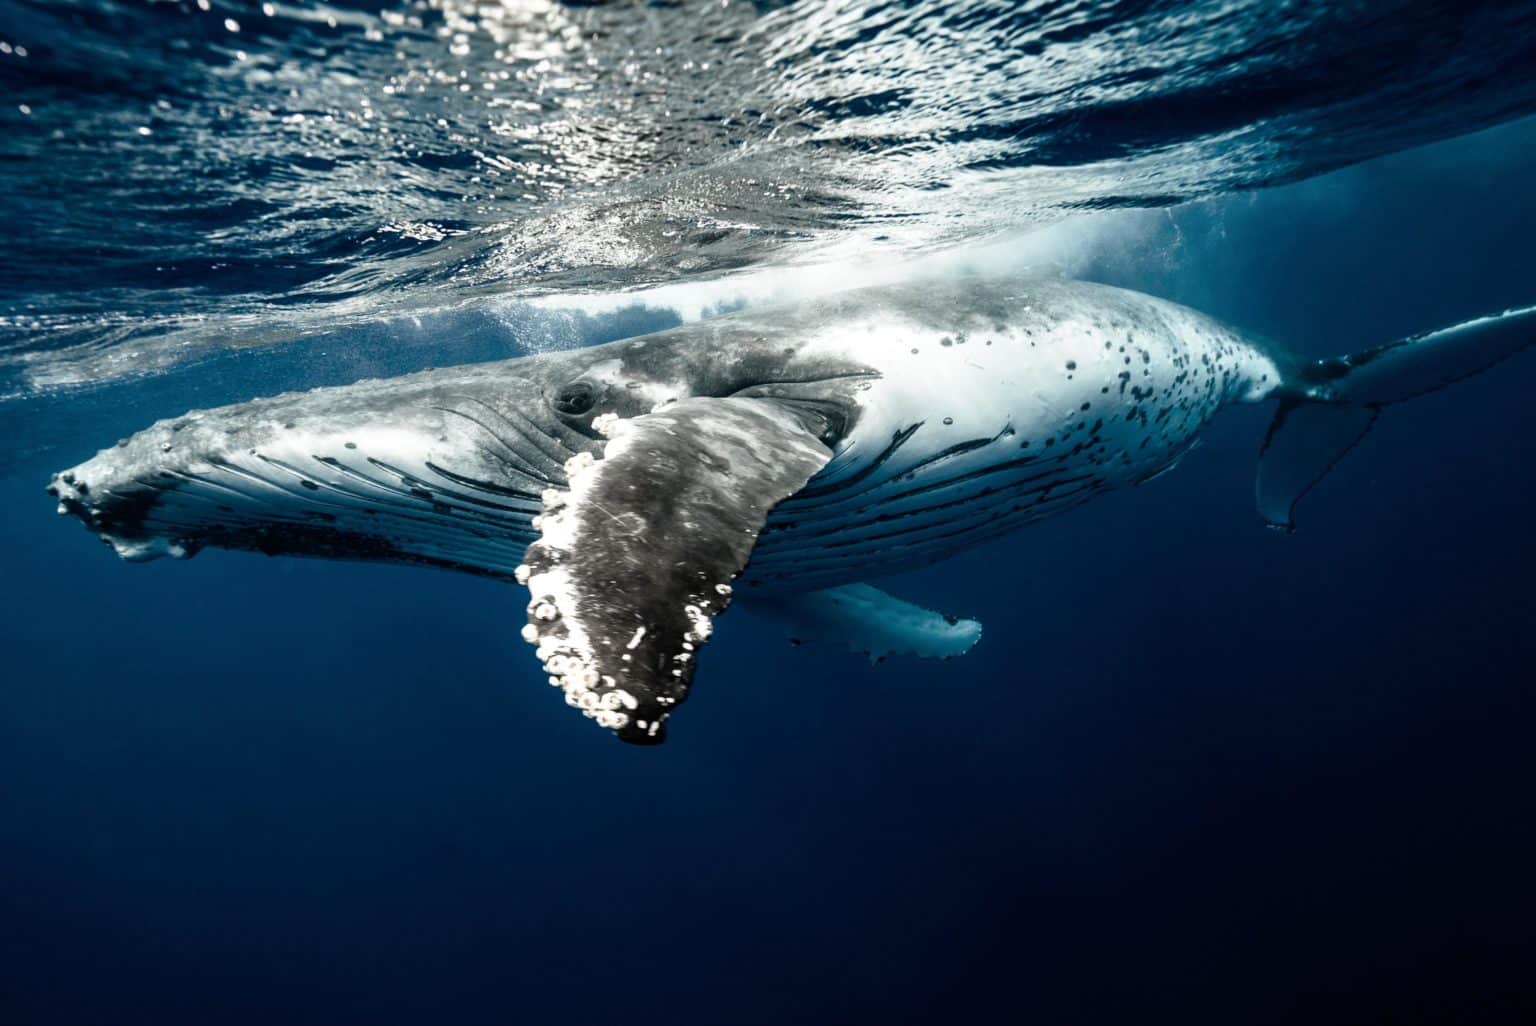 Offshore Wind and Dead Whales